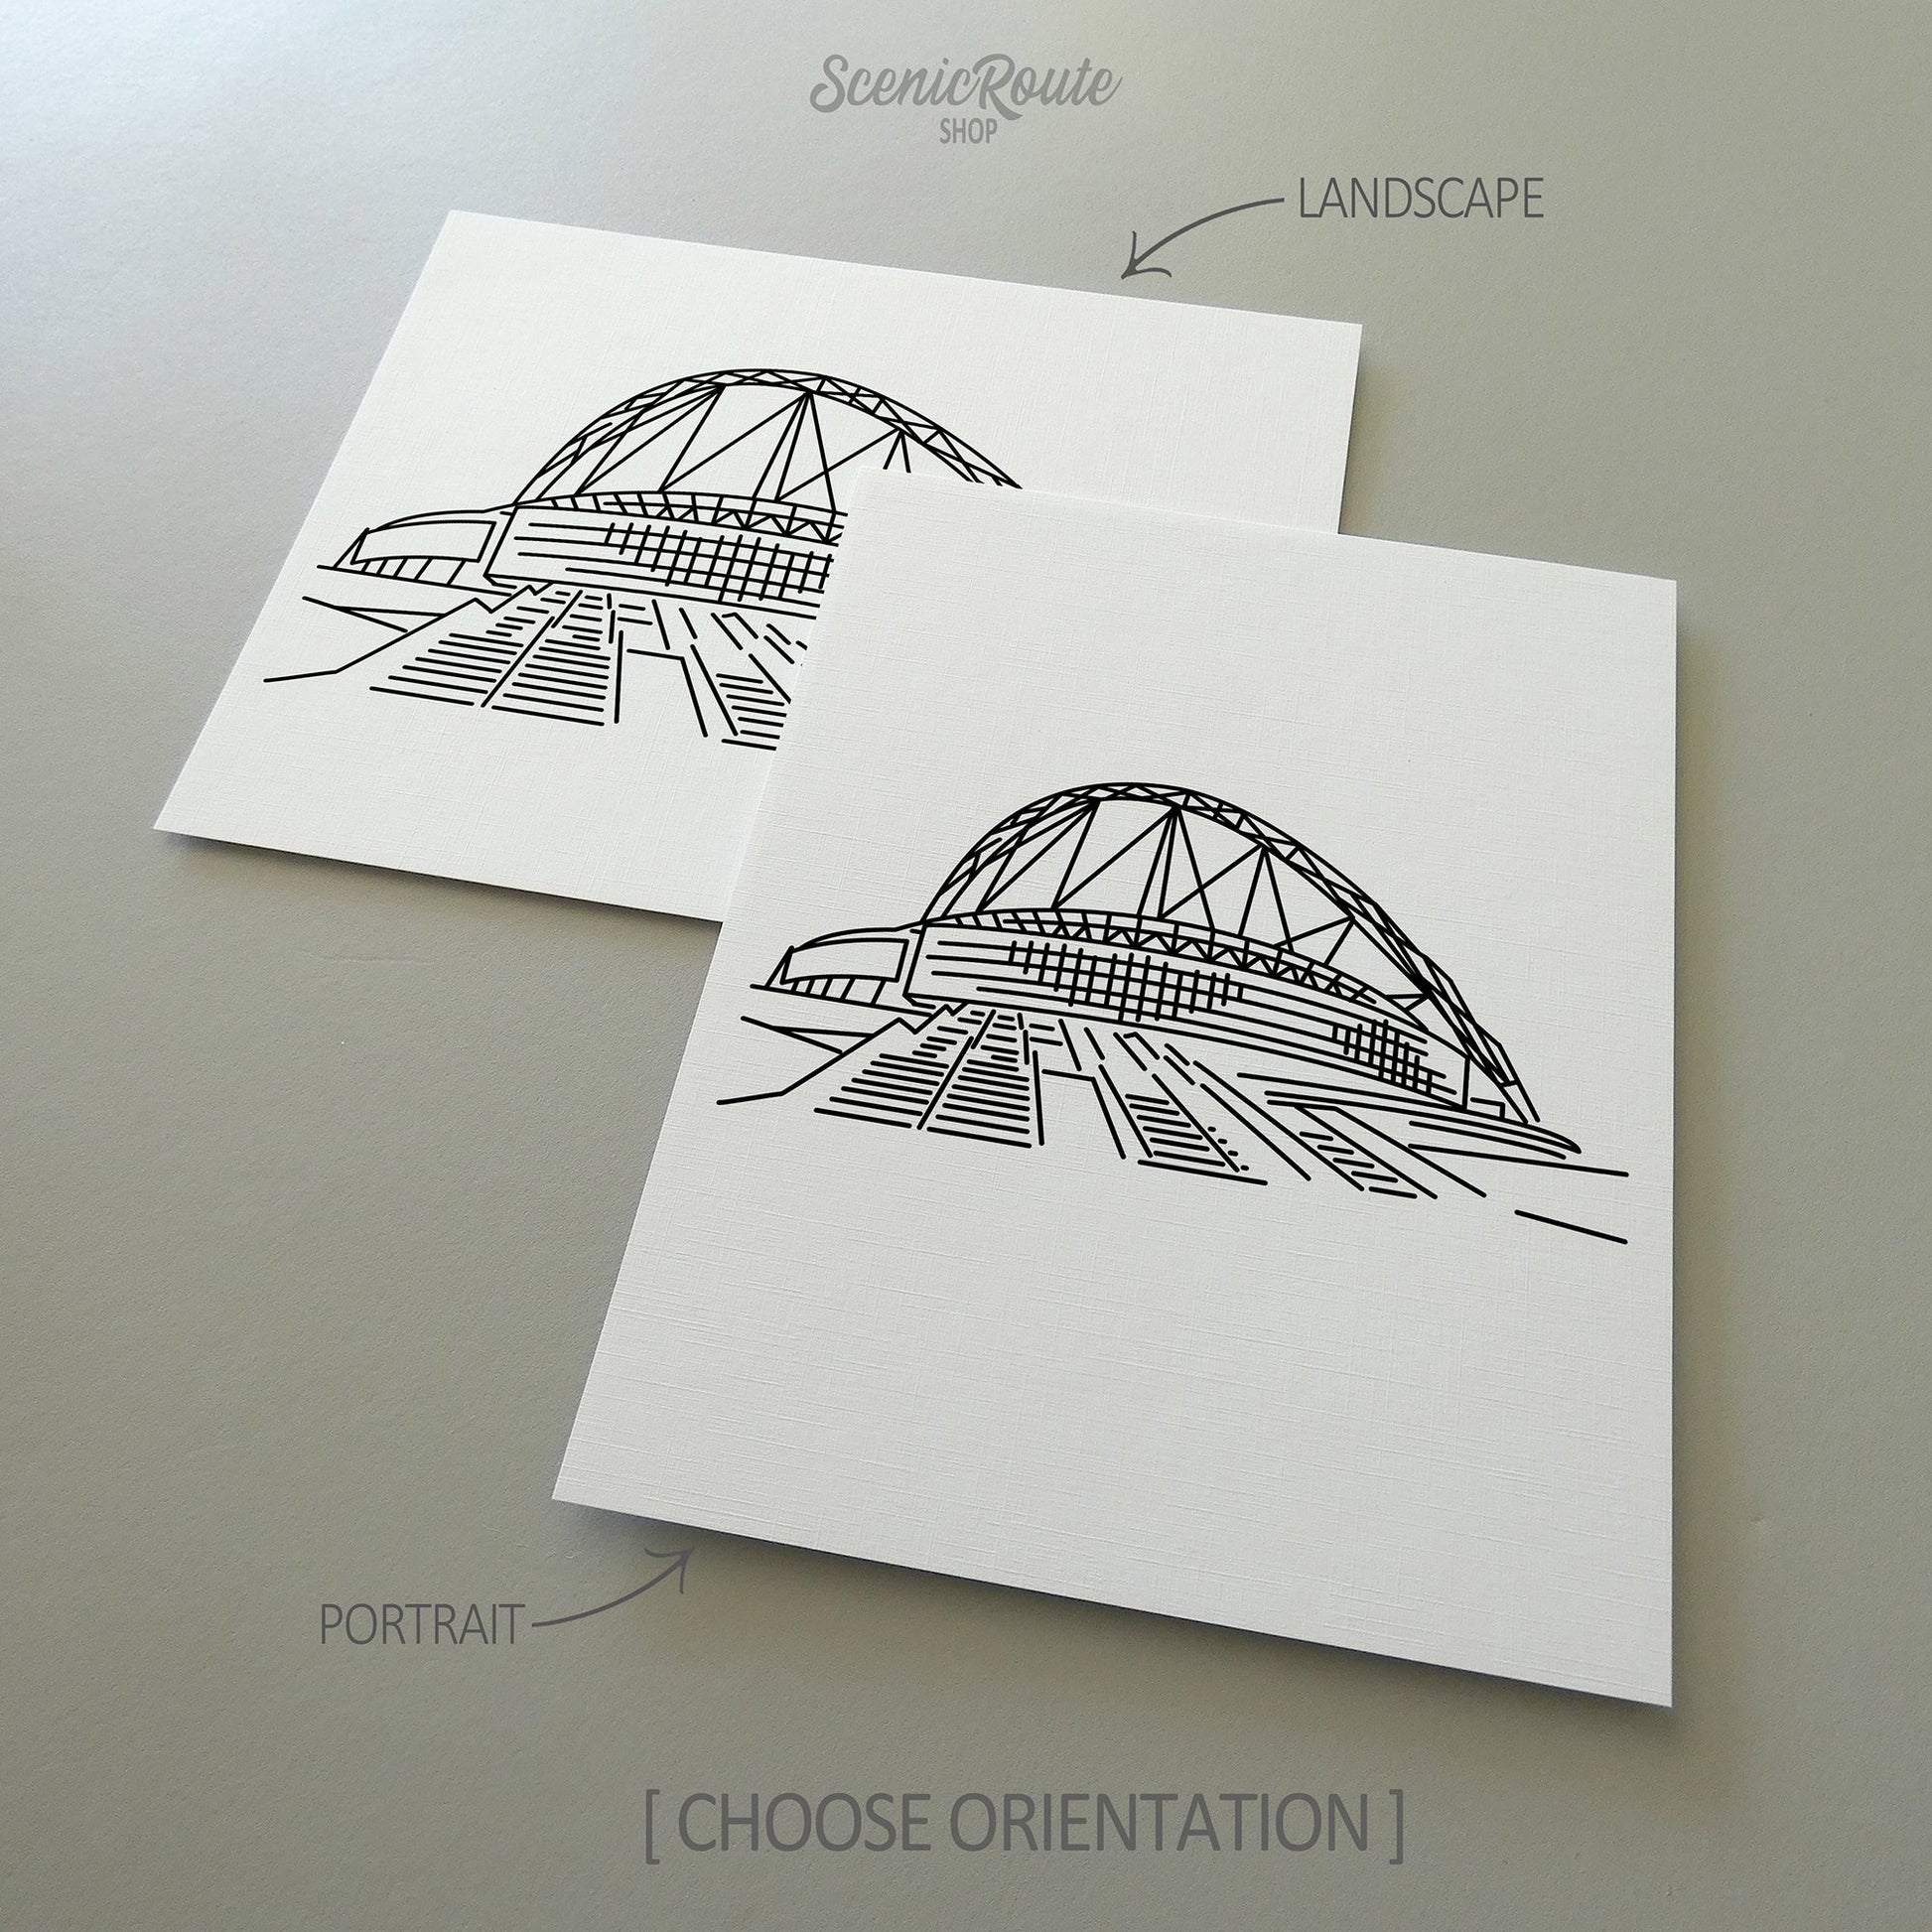 Two line art drawings of Wembley Stadium on white linen paper with a gray background.  The pieces are shown in portrait and landscape orientation for the available art print options.